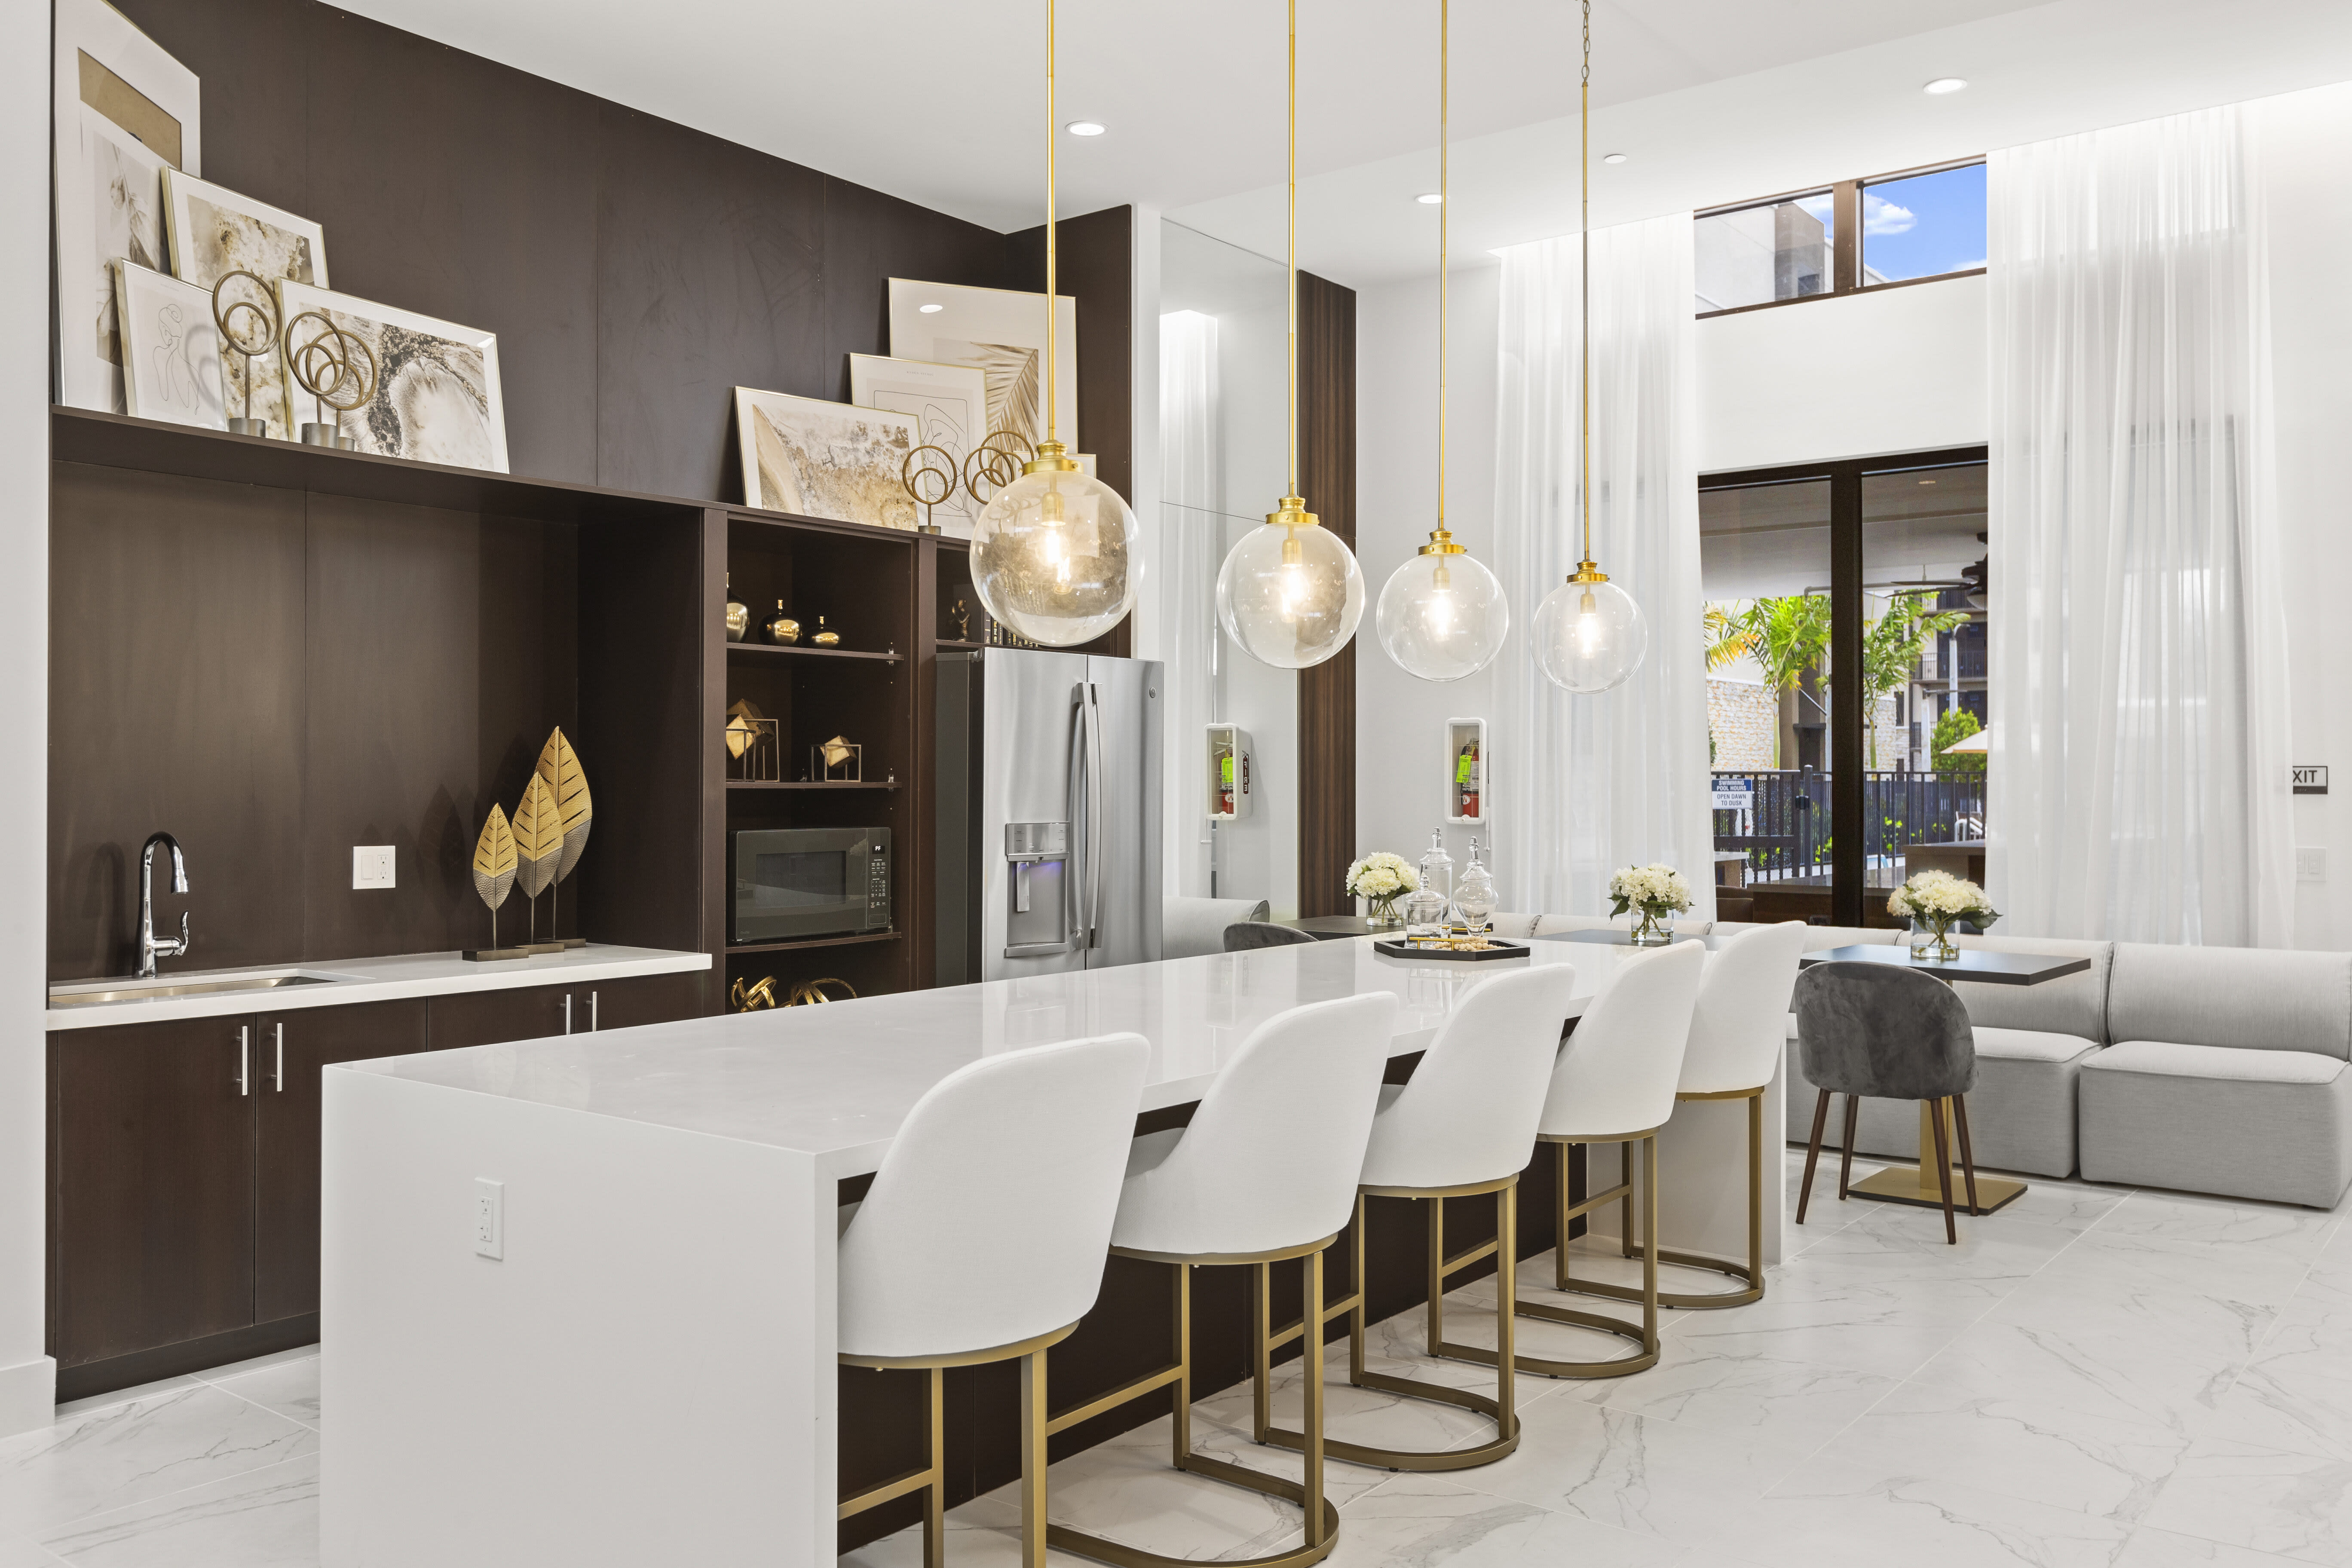 Stylish clubhouse with high-end lighting, modern furnishings, and cozy seating at Pine Ridge, West Palm Beach, Florida